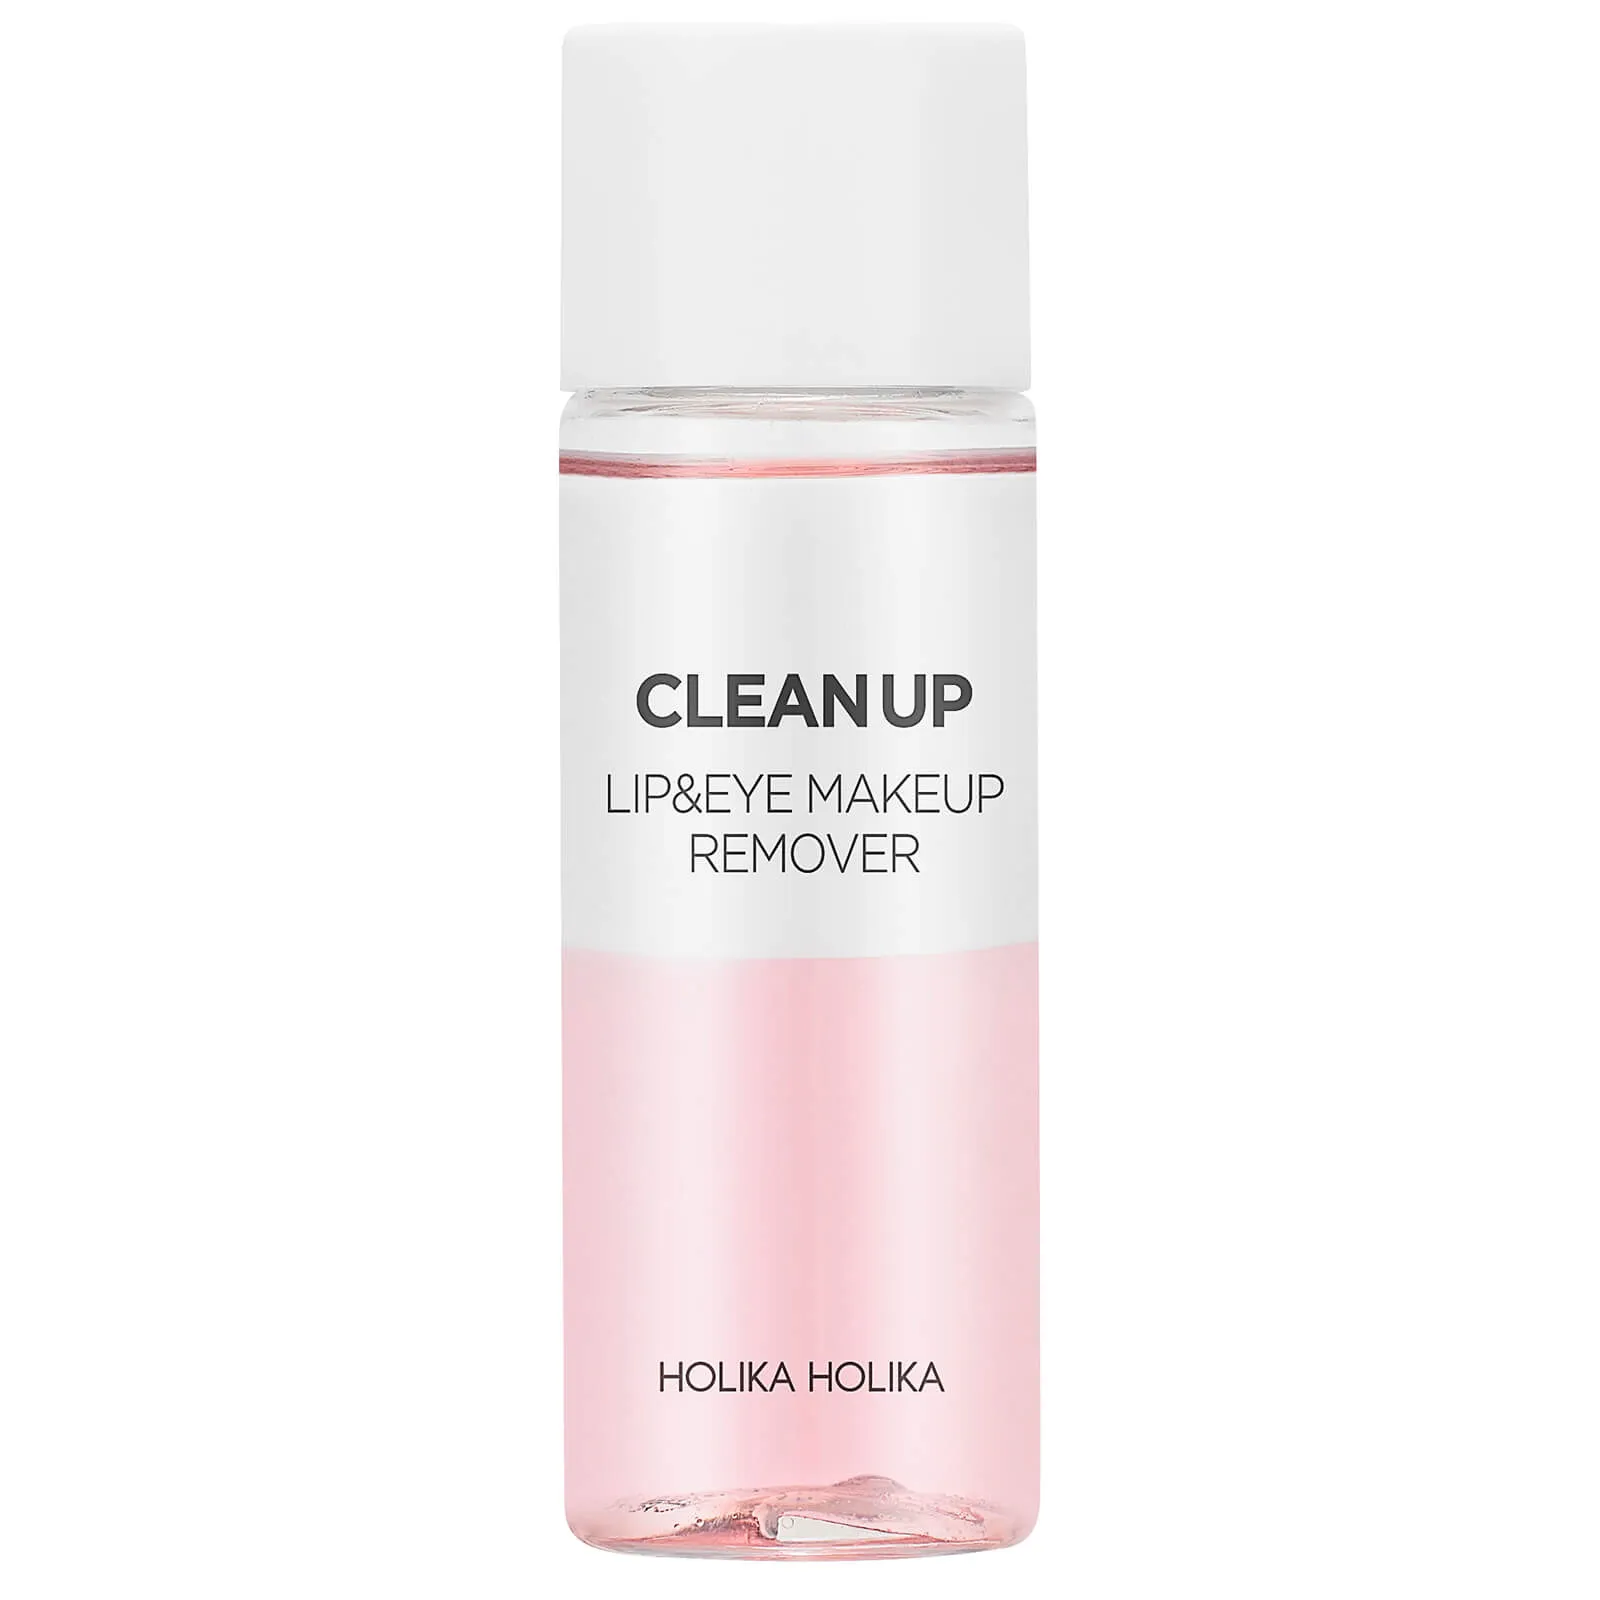  Clean Up Lip & Eye Makeup Remover 100ml